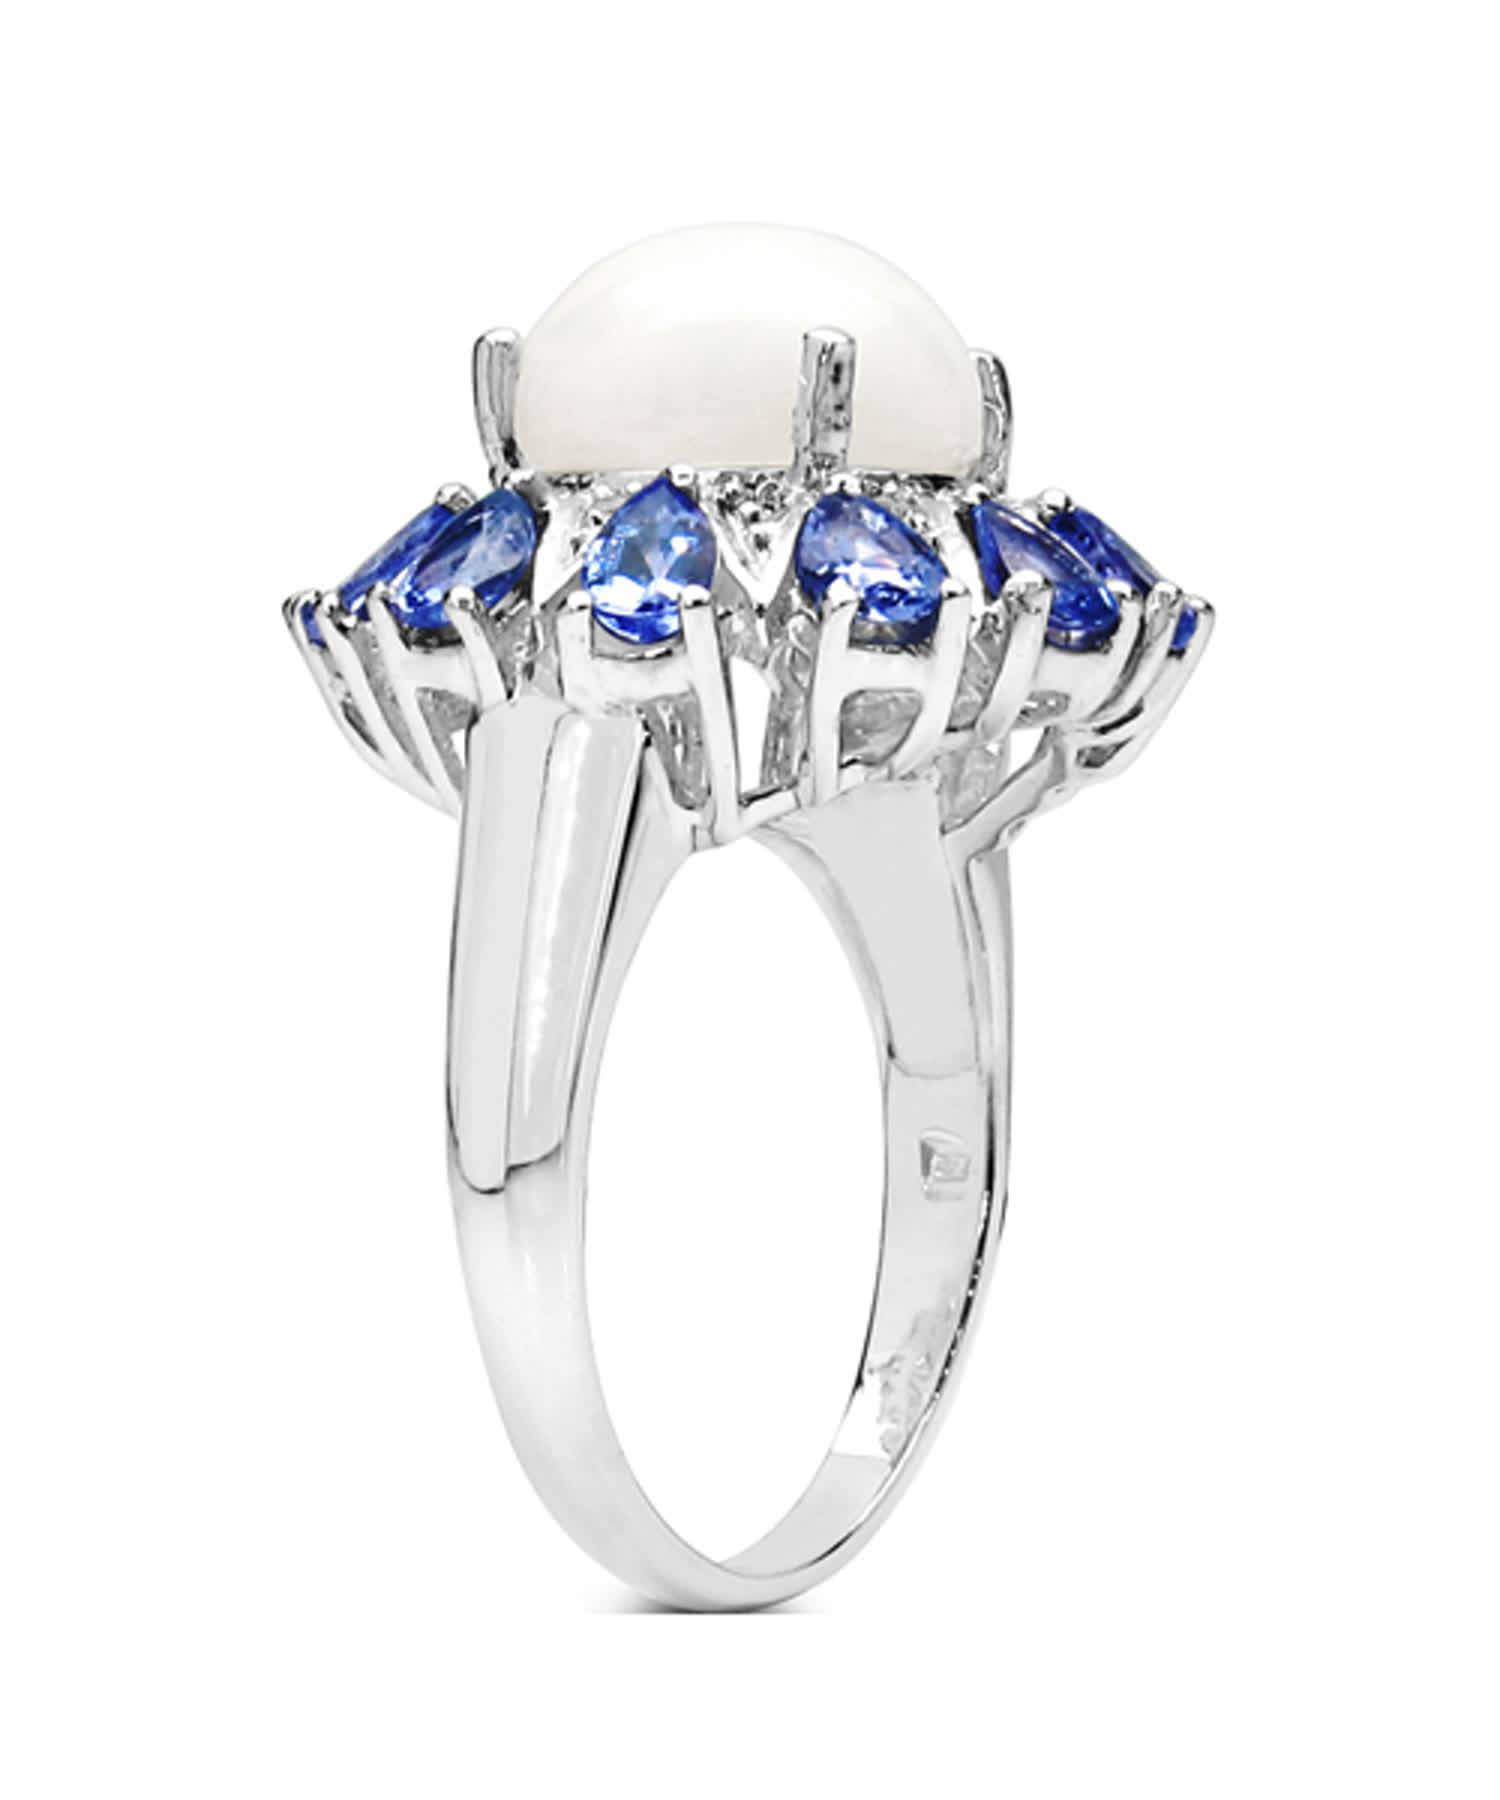 4.25ctw Natural Opal, Tanzanite and Topaz Rhodium Plated 925 Sterling Silver Cocktail Ring View 2